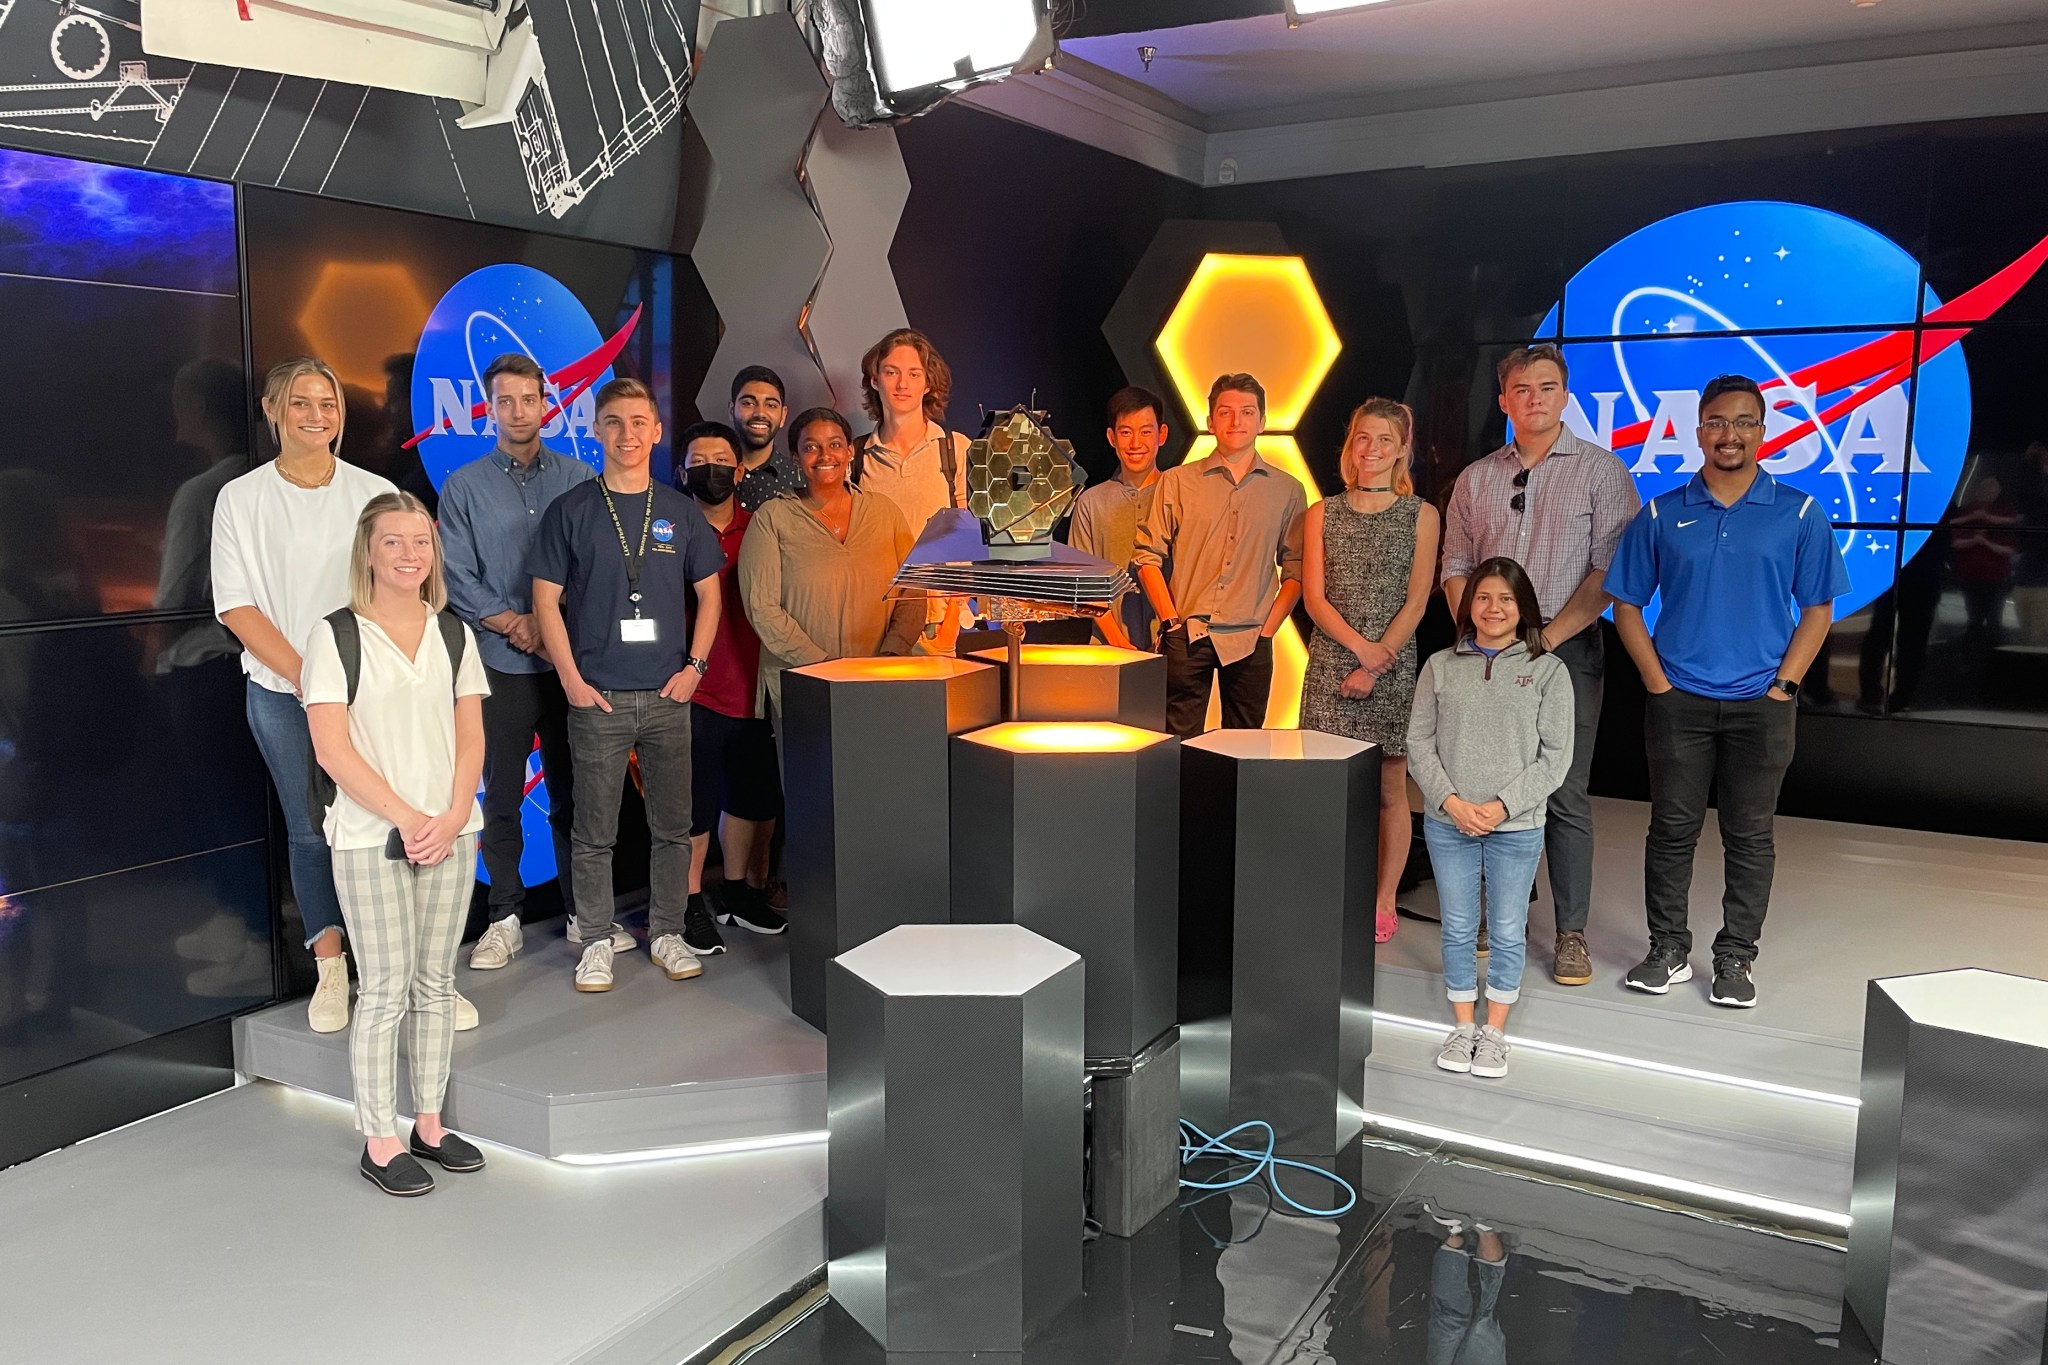 14 young people gather on a stage in front of black glass and NASA logos. In front hexagonal pedastles support a model of the James Webb Space Telescope, with it's golden honeycomb mirror. Hexagons and technical drawings permeate the design.